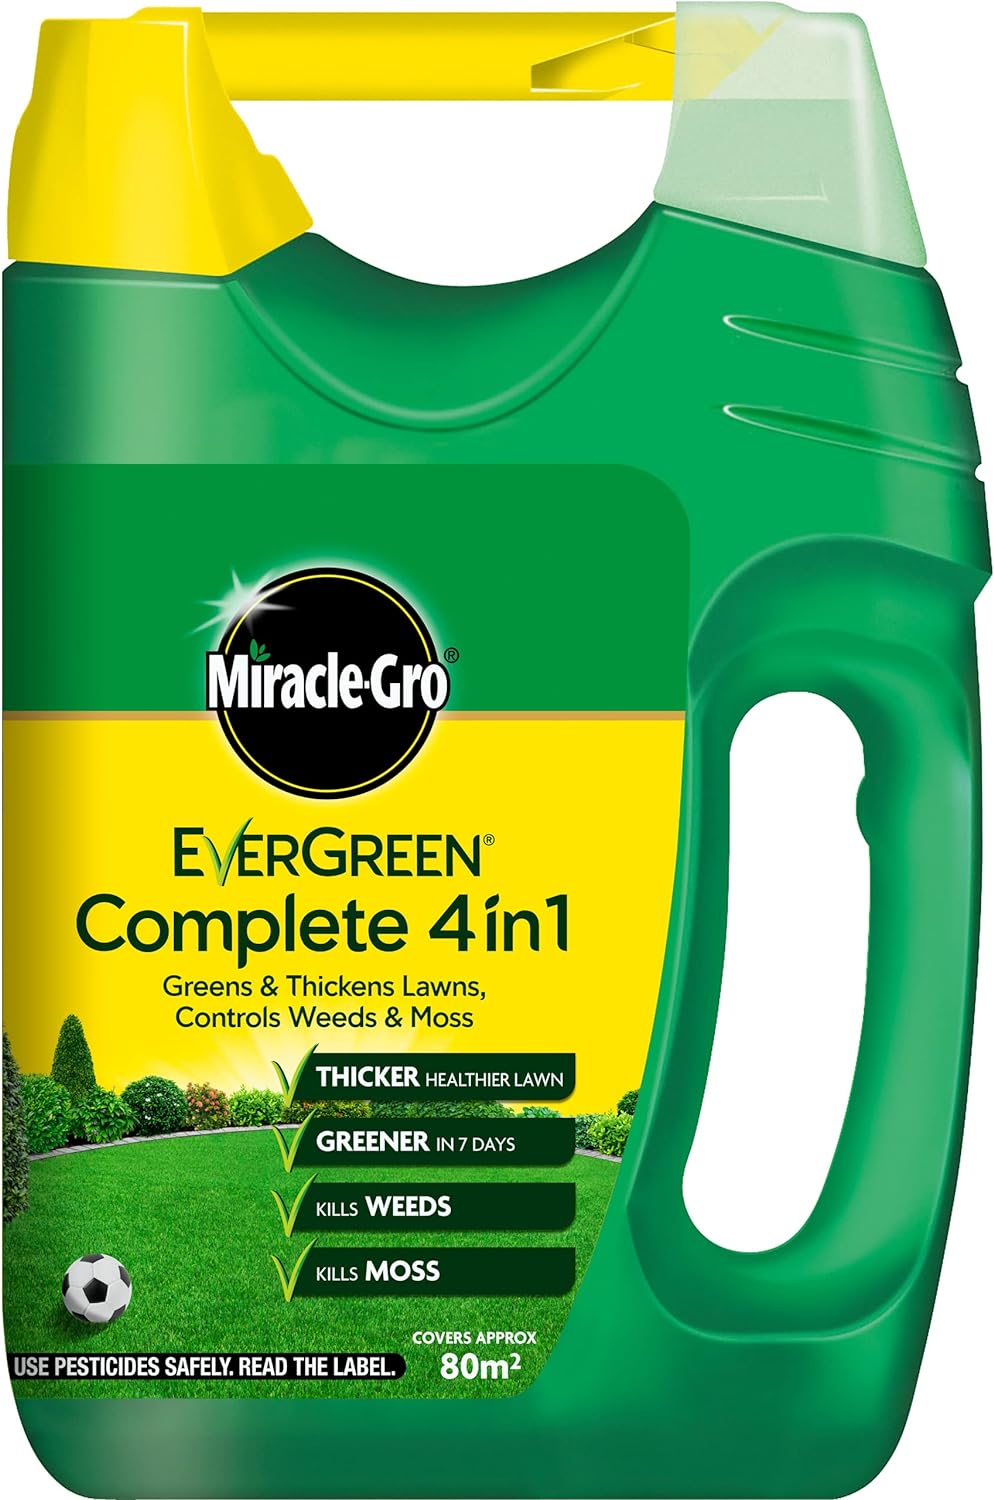 Miracle-Gro EverGreen Complete 4-in-1 SPREADER - 80m2